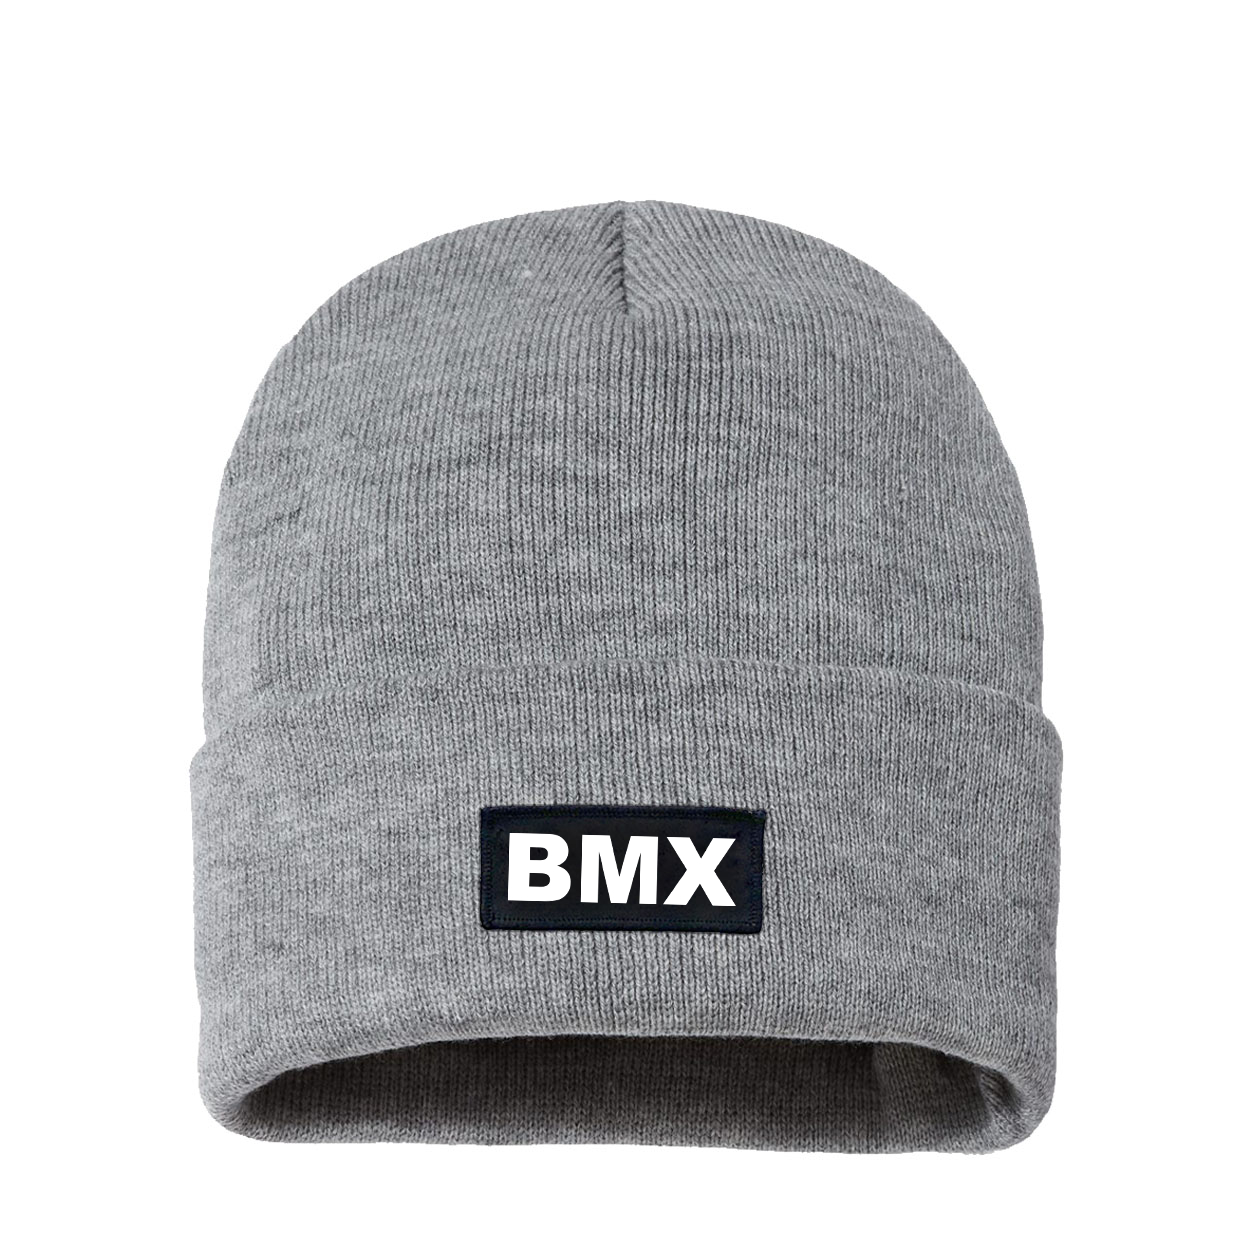 BMX Brand Logo Night Out Woven Patch Sherpa Lined Cuffed Beanie Heather Gray